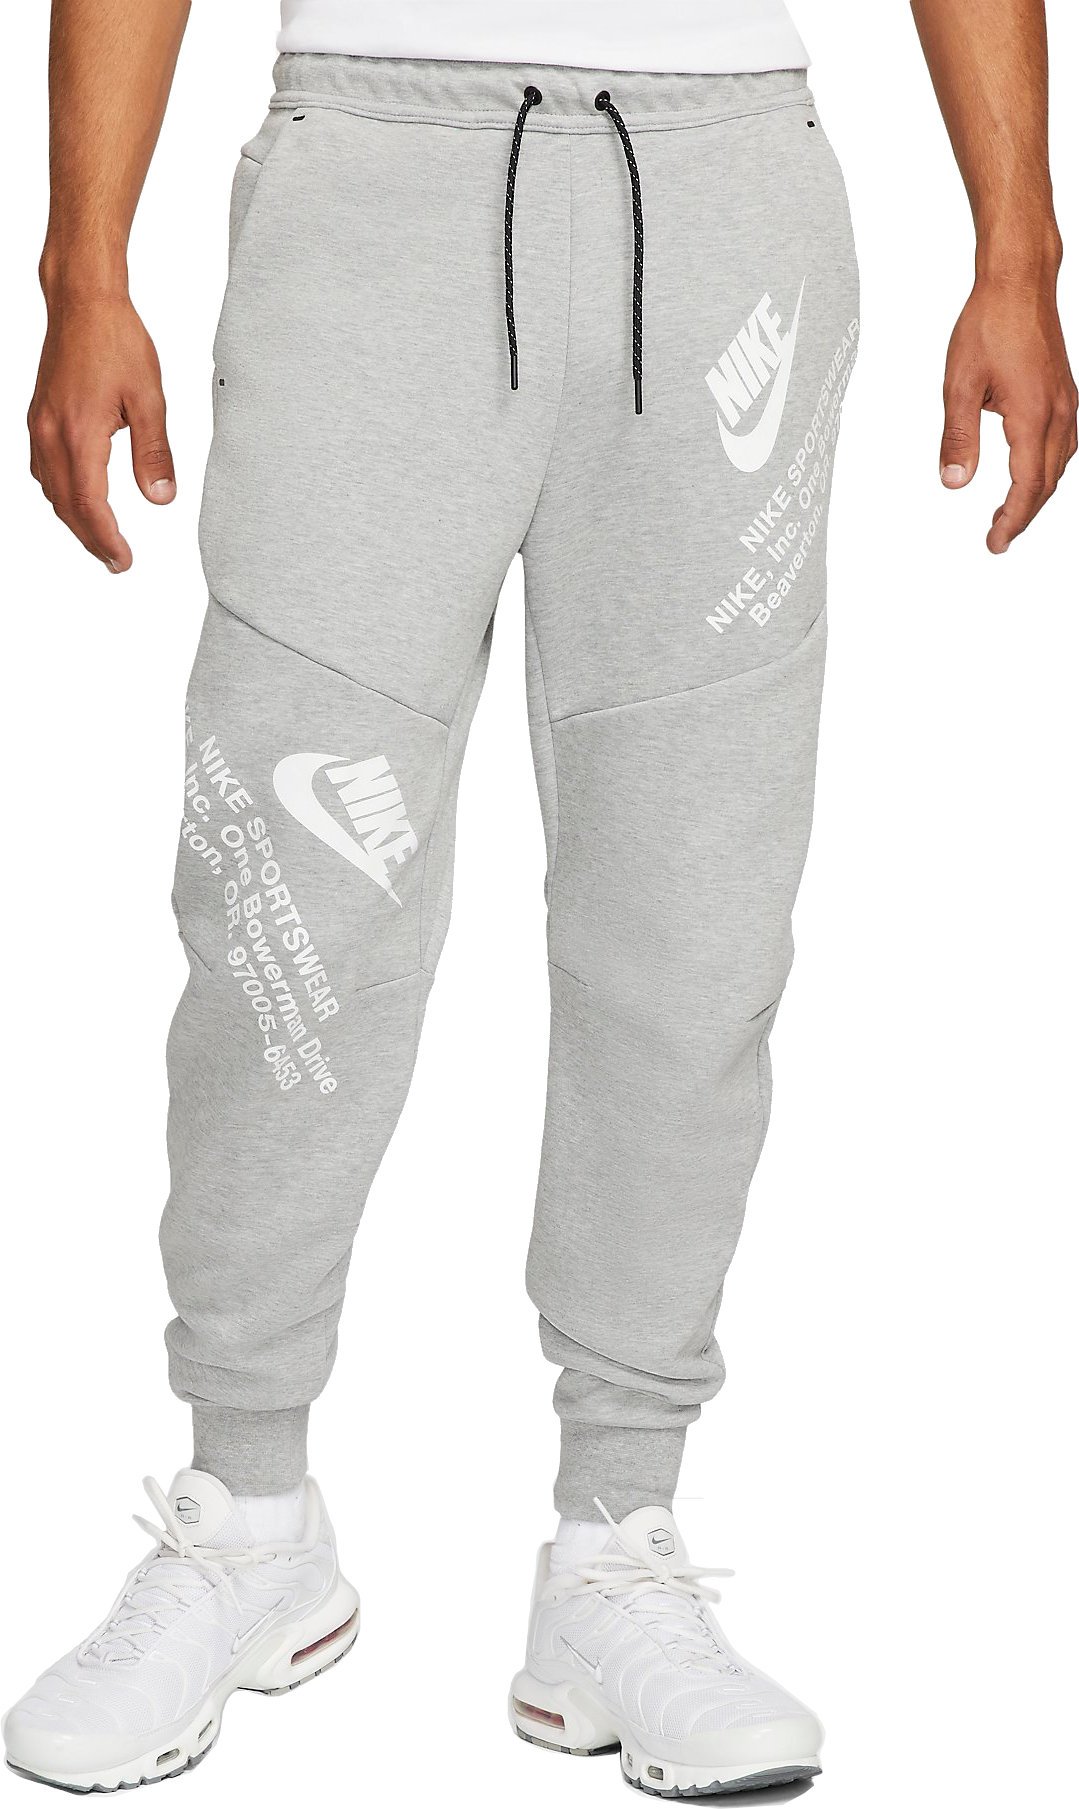 Champs Sports Nike Academy 23 KPZ Pants | CoolSprings Galleria